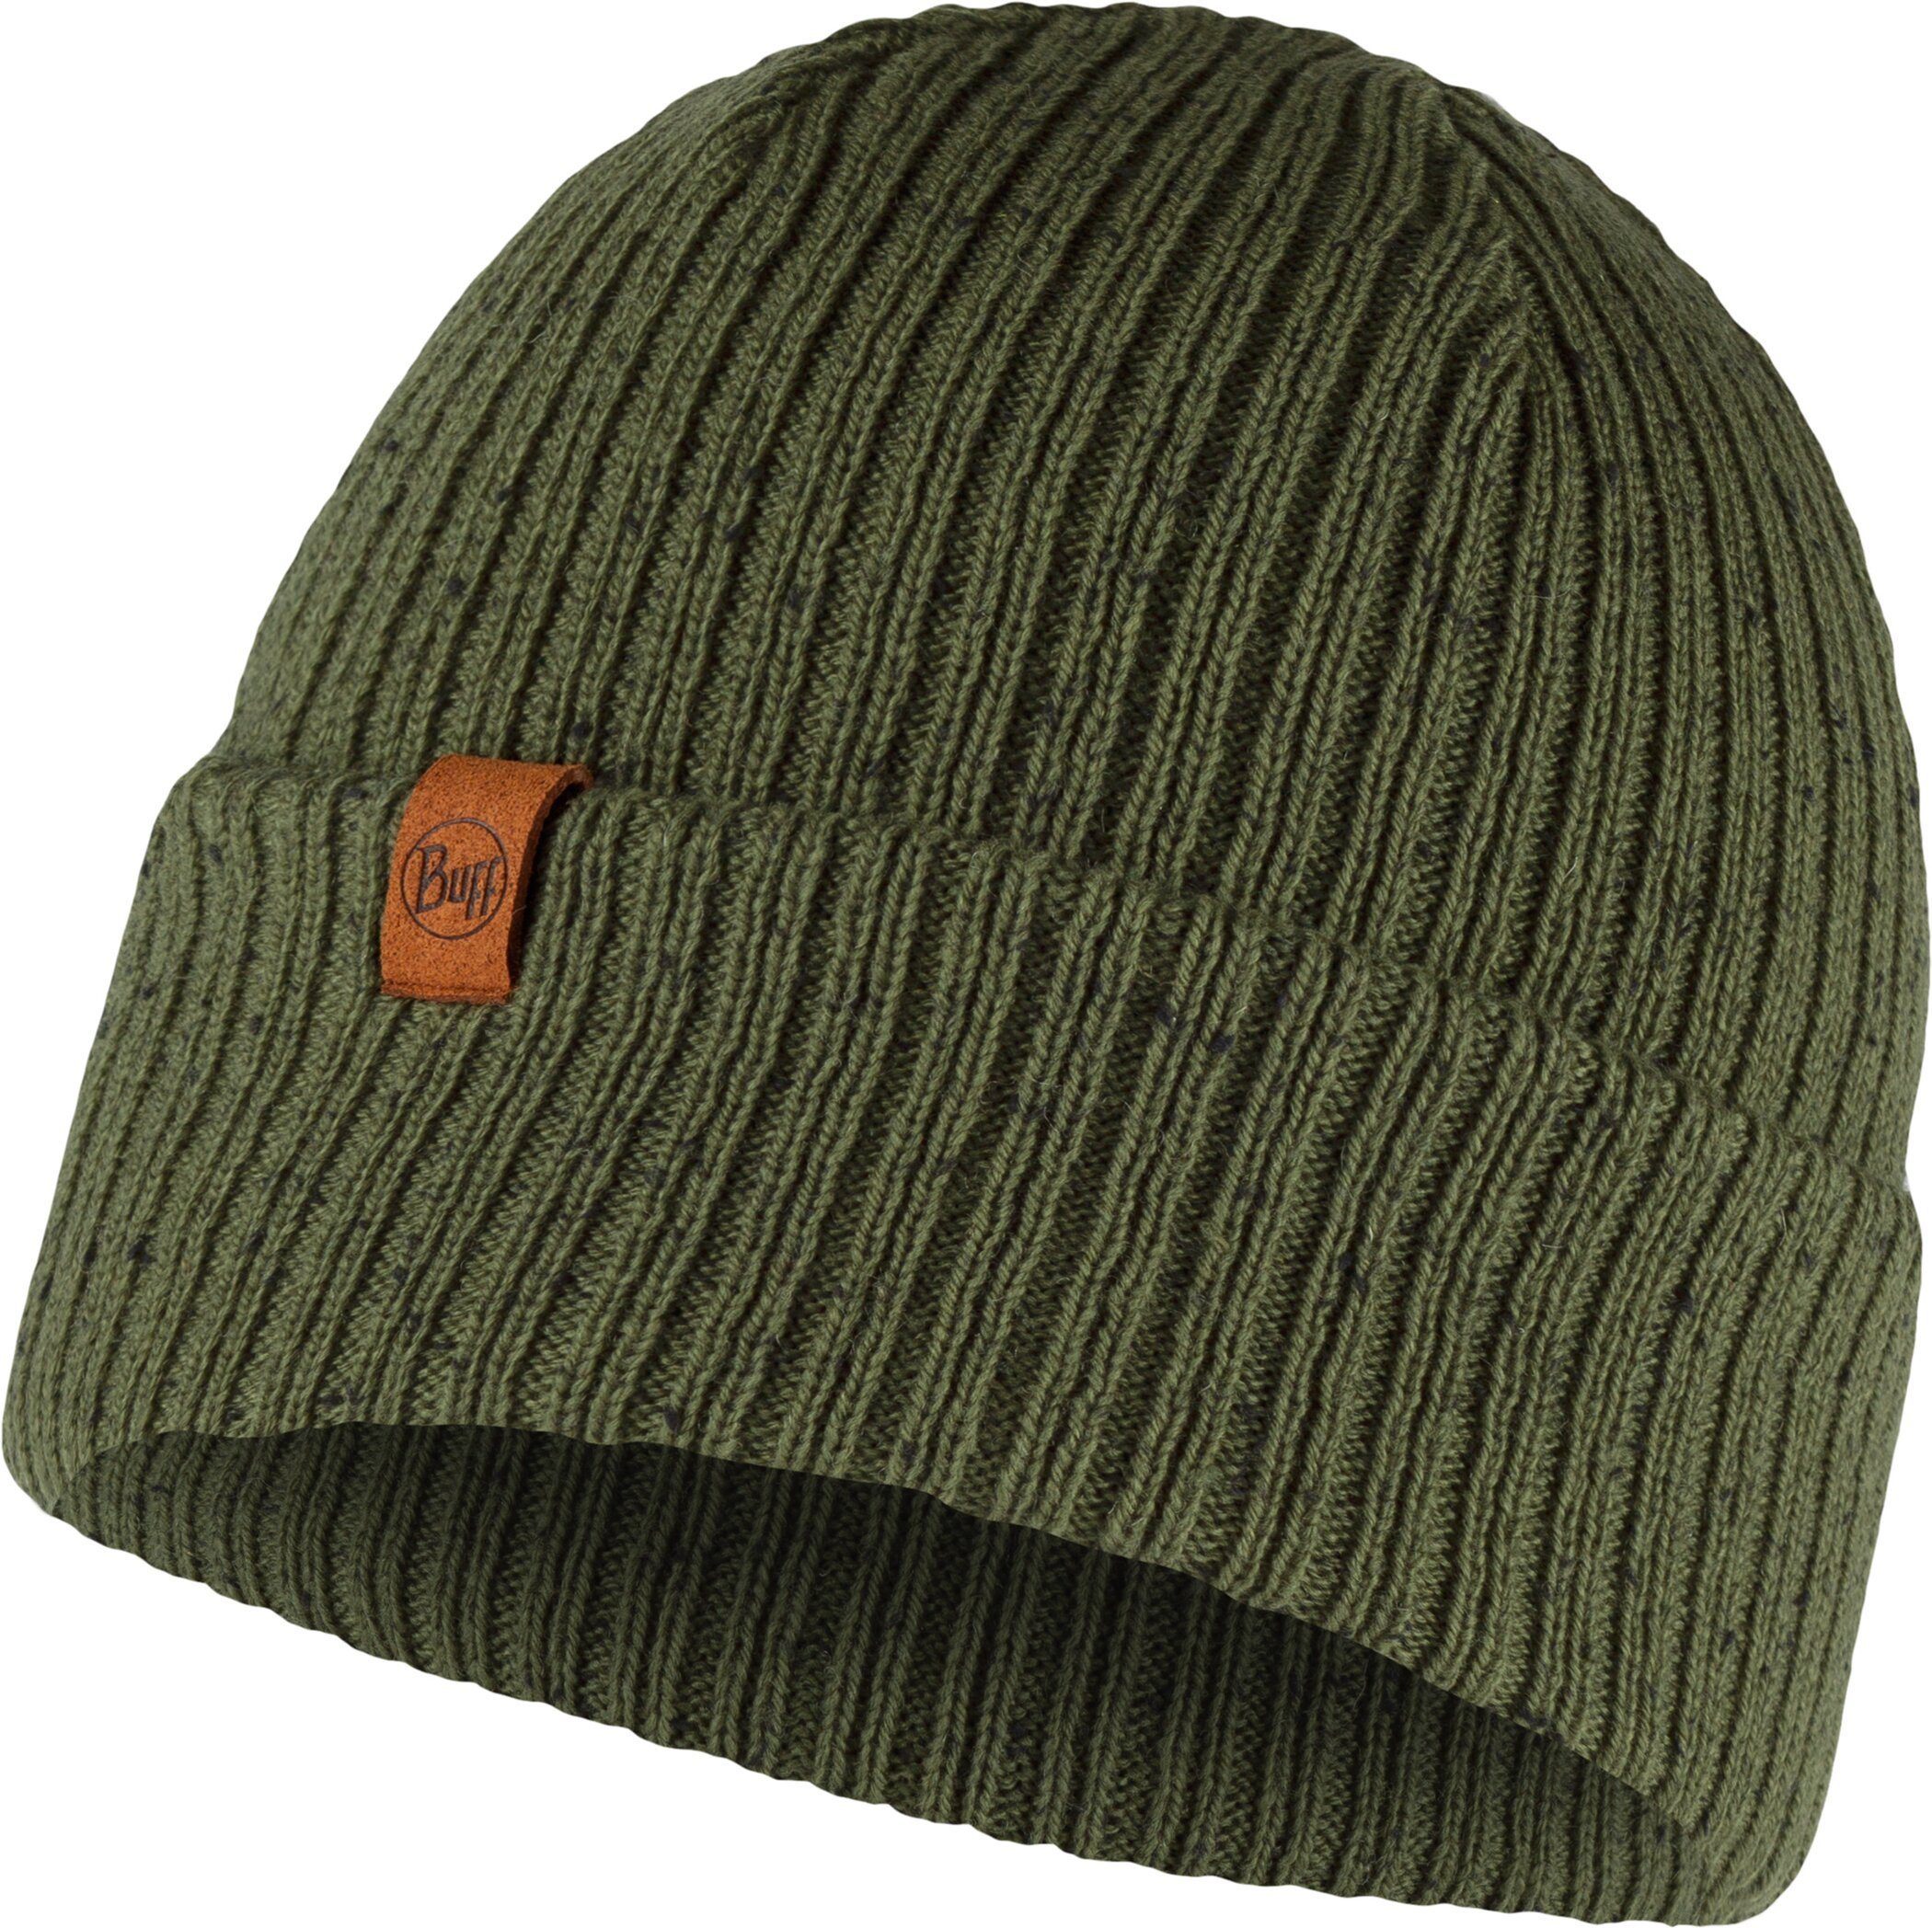 Buff Beanie SOLID CAMOUFLAGE Beanie Knitted